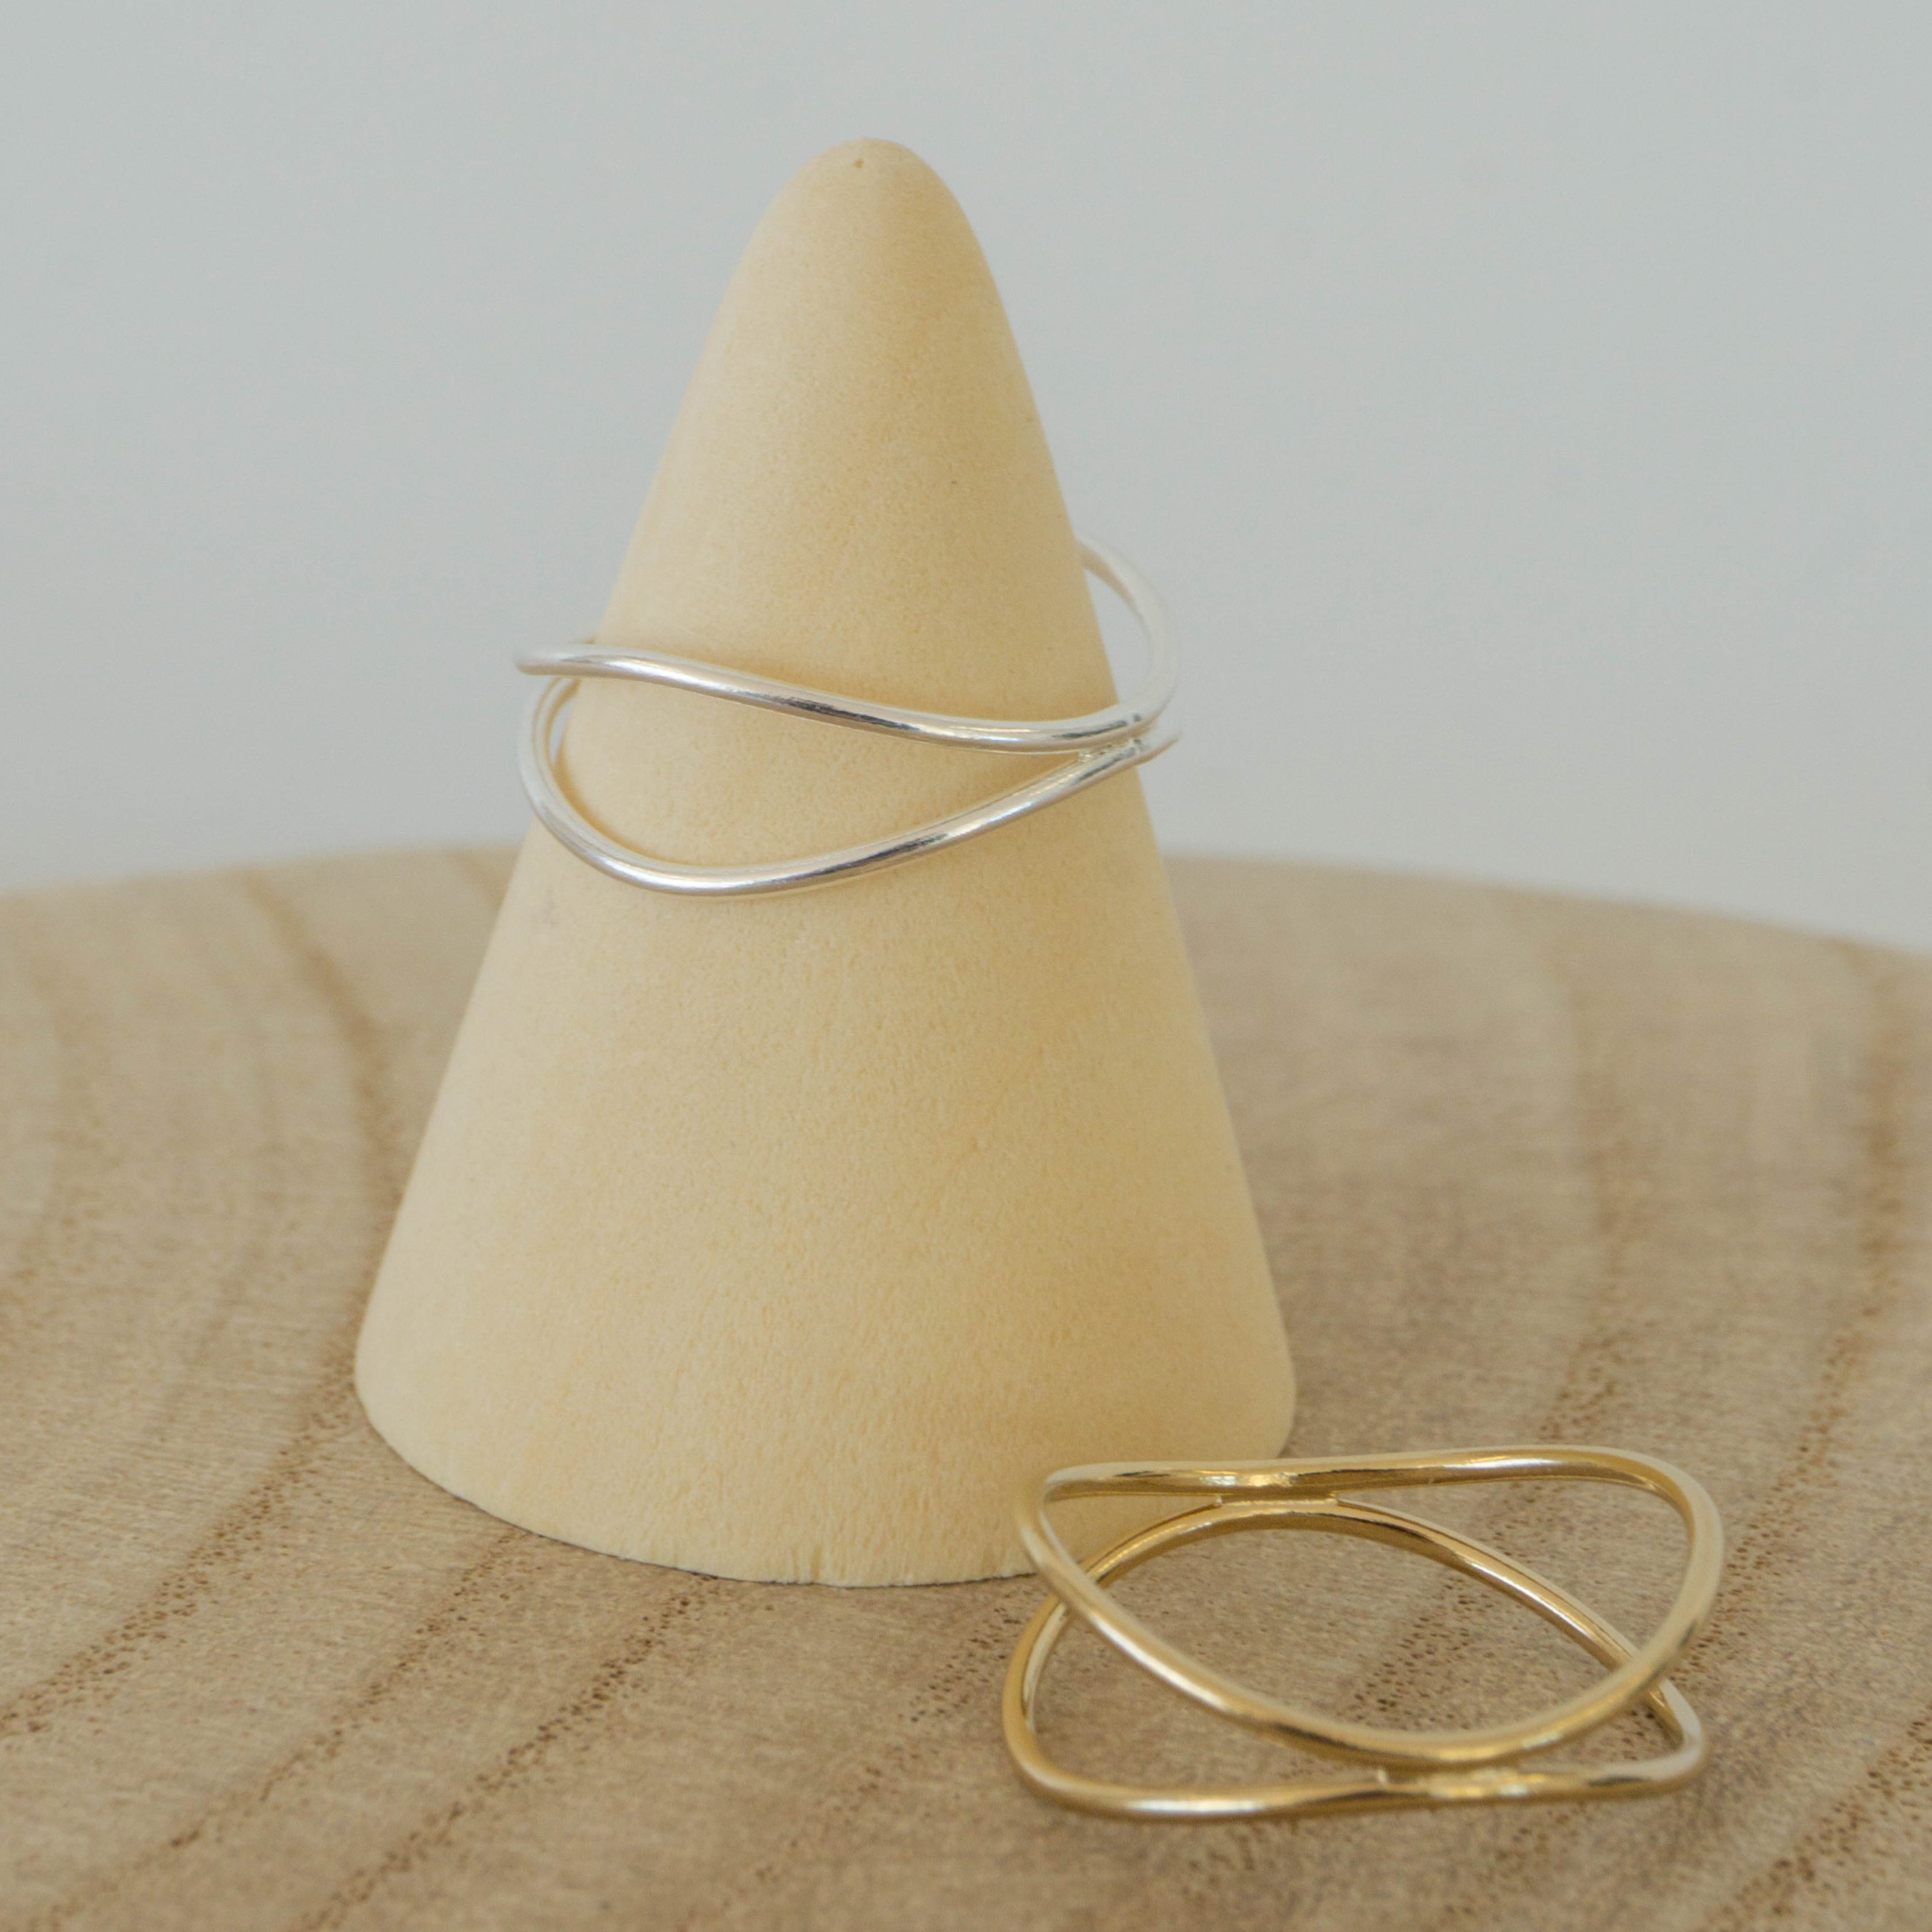 double wave ring / gold filled stacking ring / sterling silver stacking ring